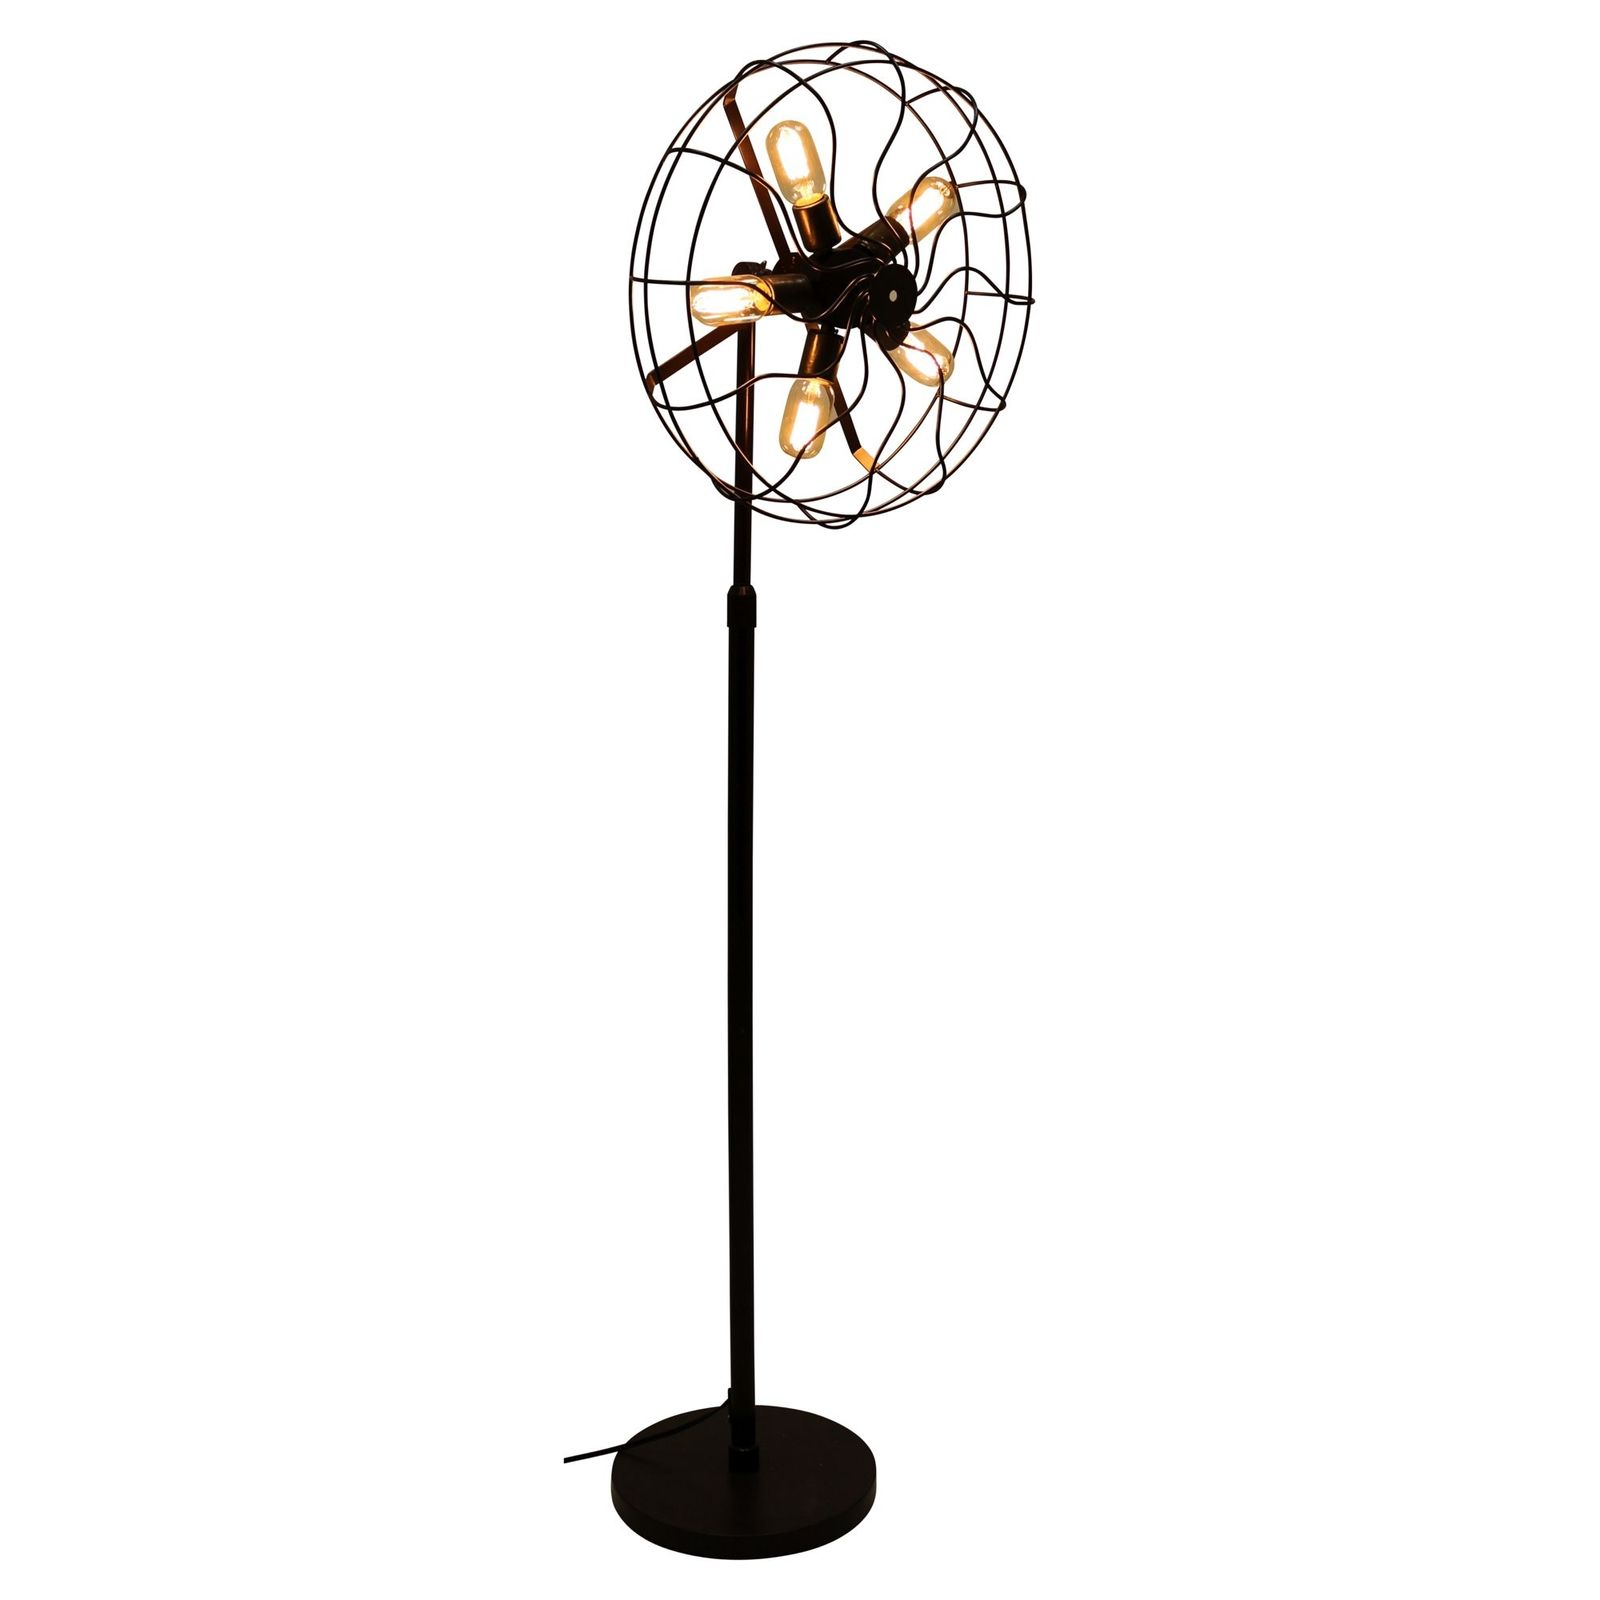 Ozzy Vintage Industrial Floor Lamp In Antique Finish Lumisource pertaining to dimensions 1600 X 1600